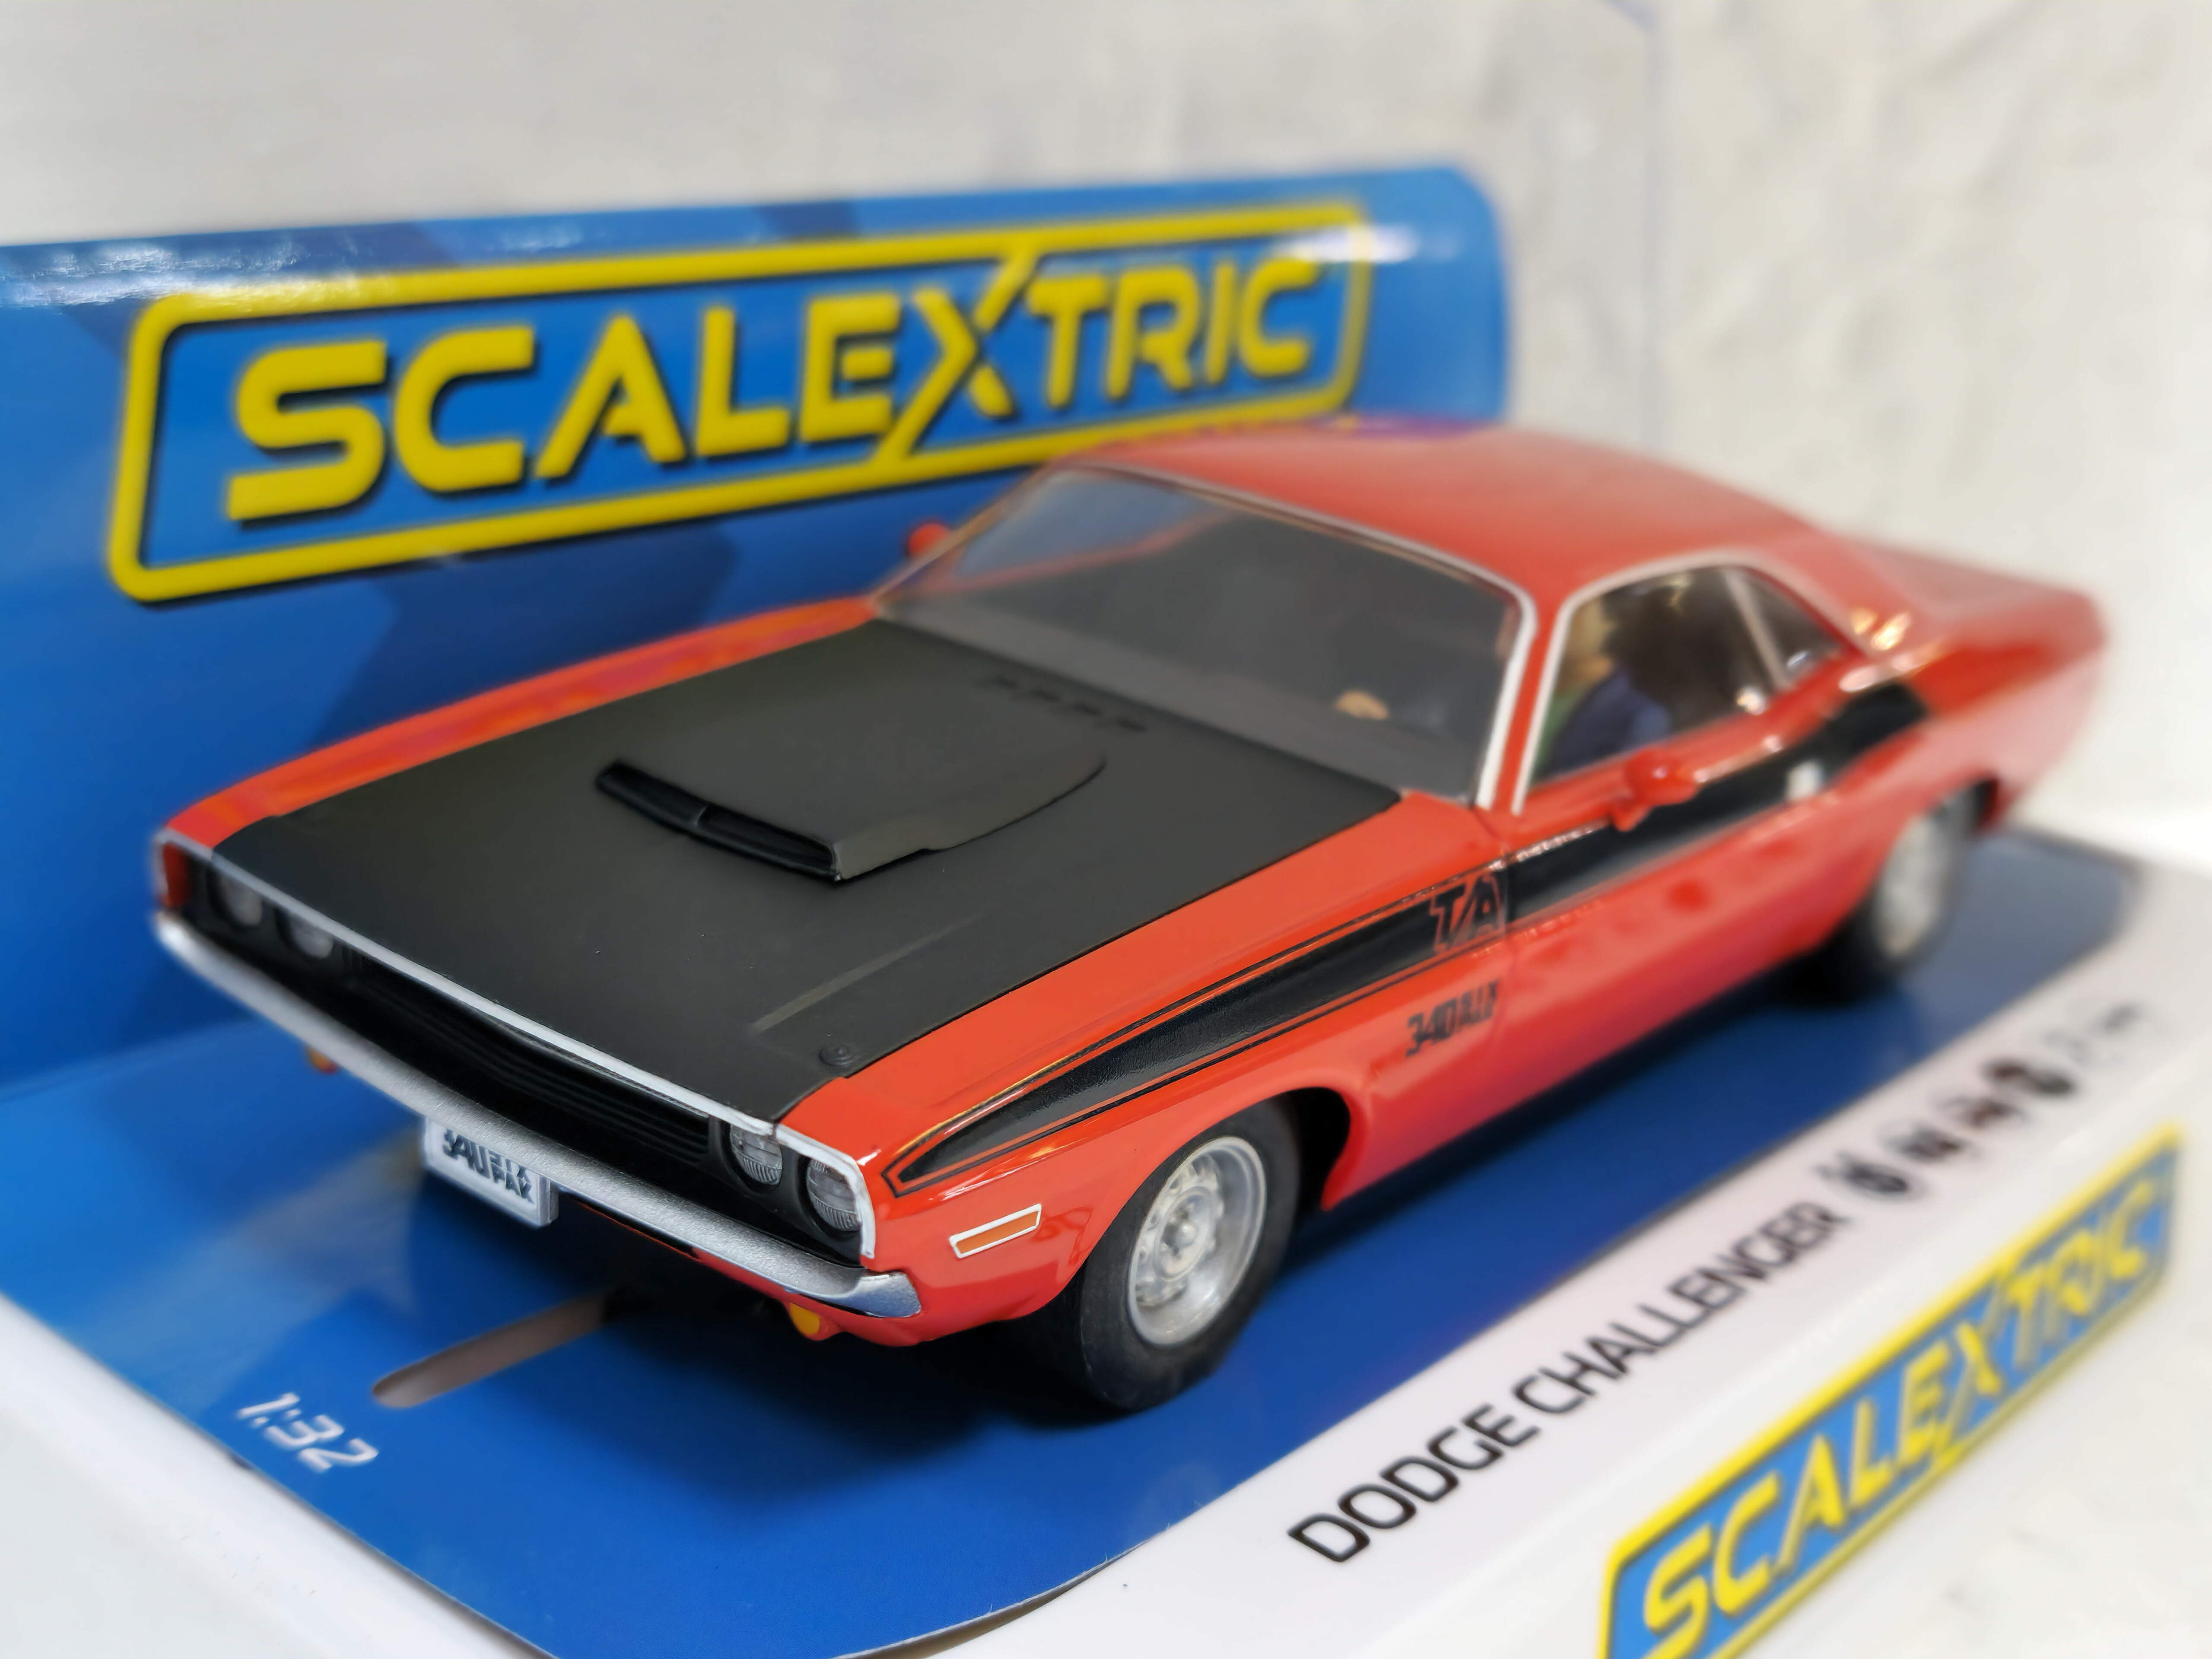 C4065 Scalextric Dodge Challenger Red & Black 1:32 Slot Car - Great  Traditions